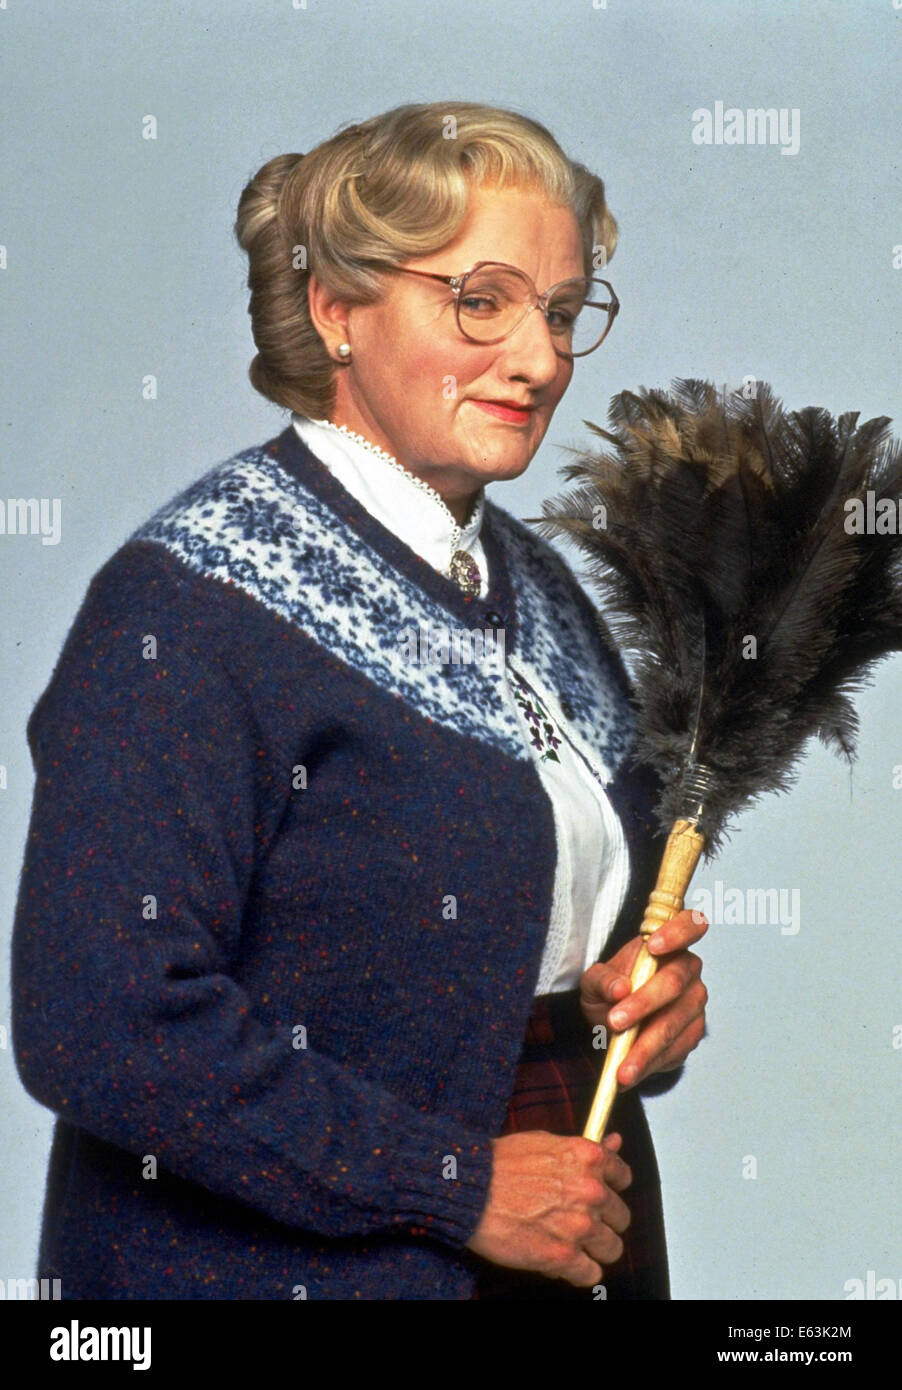 Mrs. Doubtfire is a 1993 American comedy film starring Robin Williams. Stock Photo